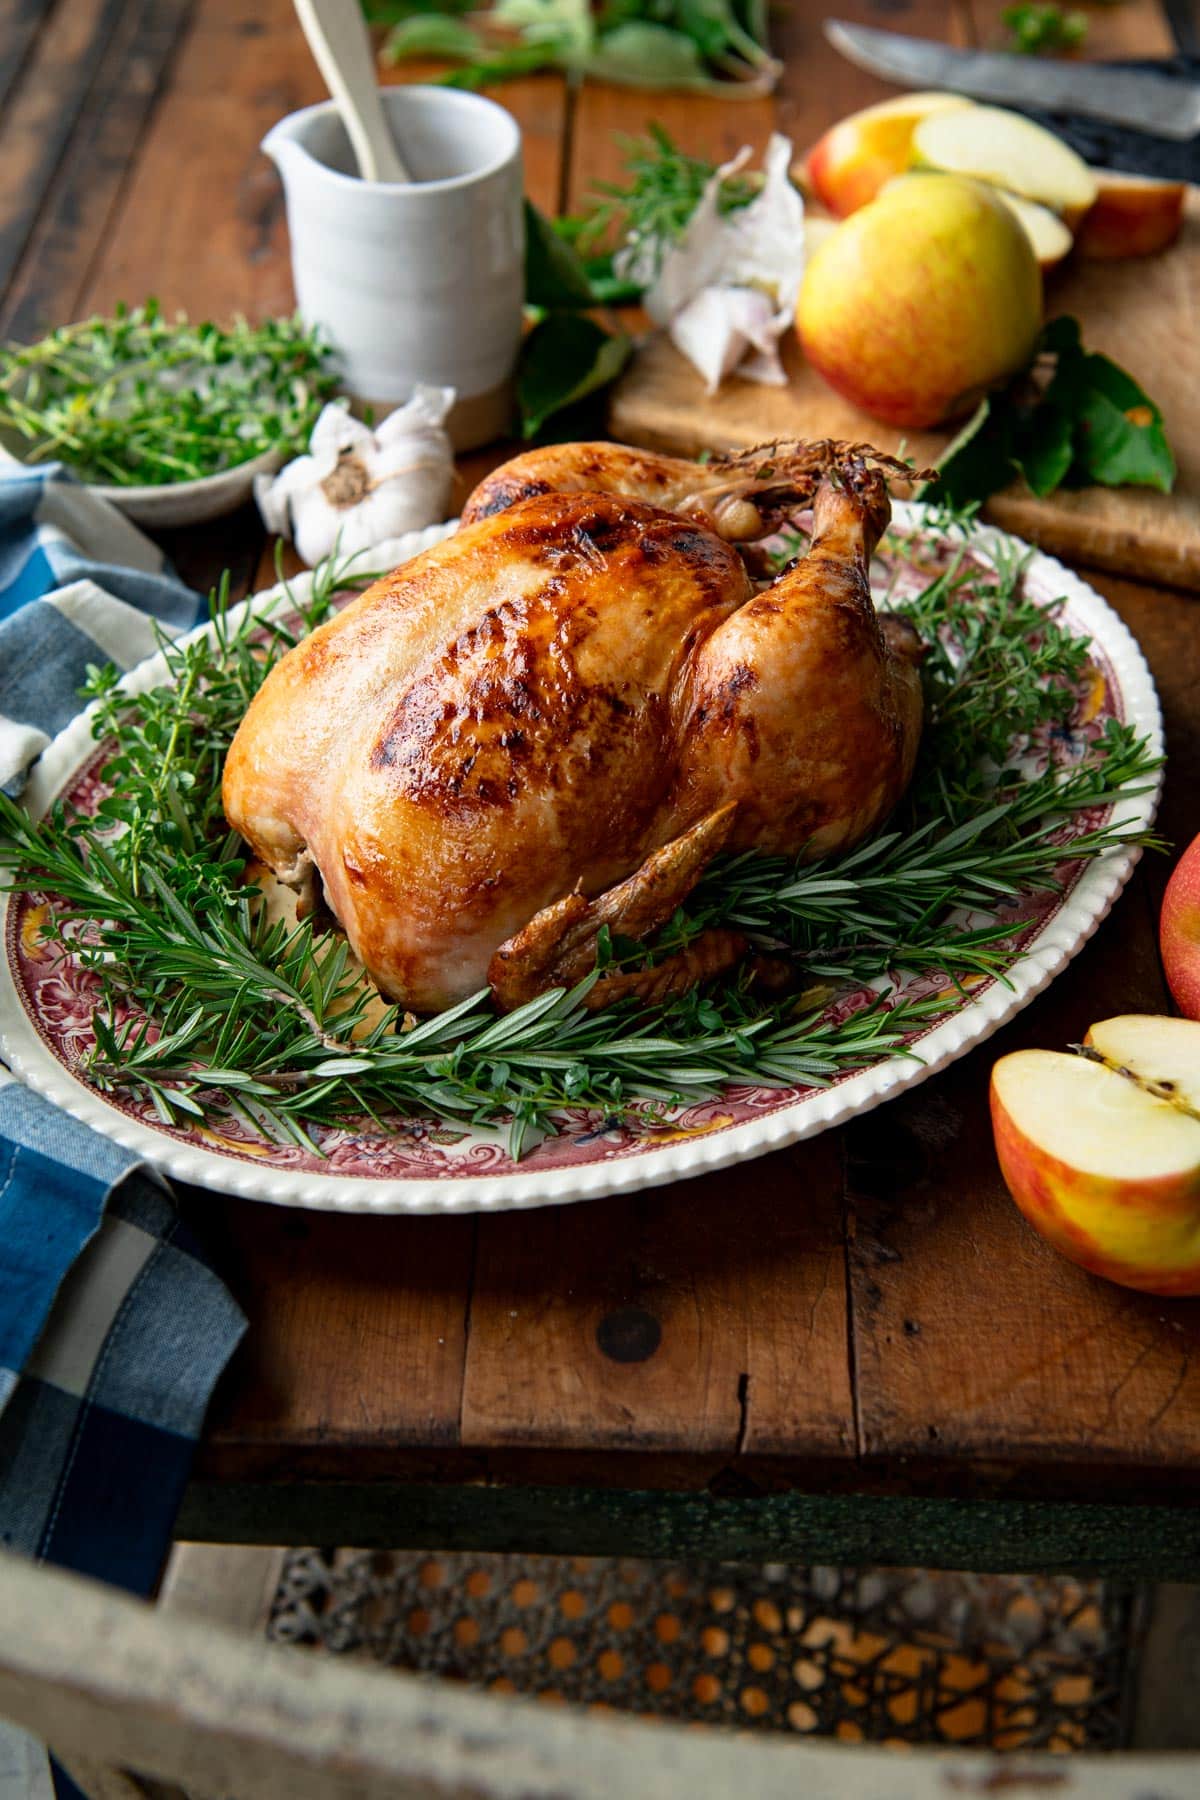 Cider glazed whole roasted chicken on a table.